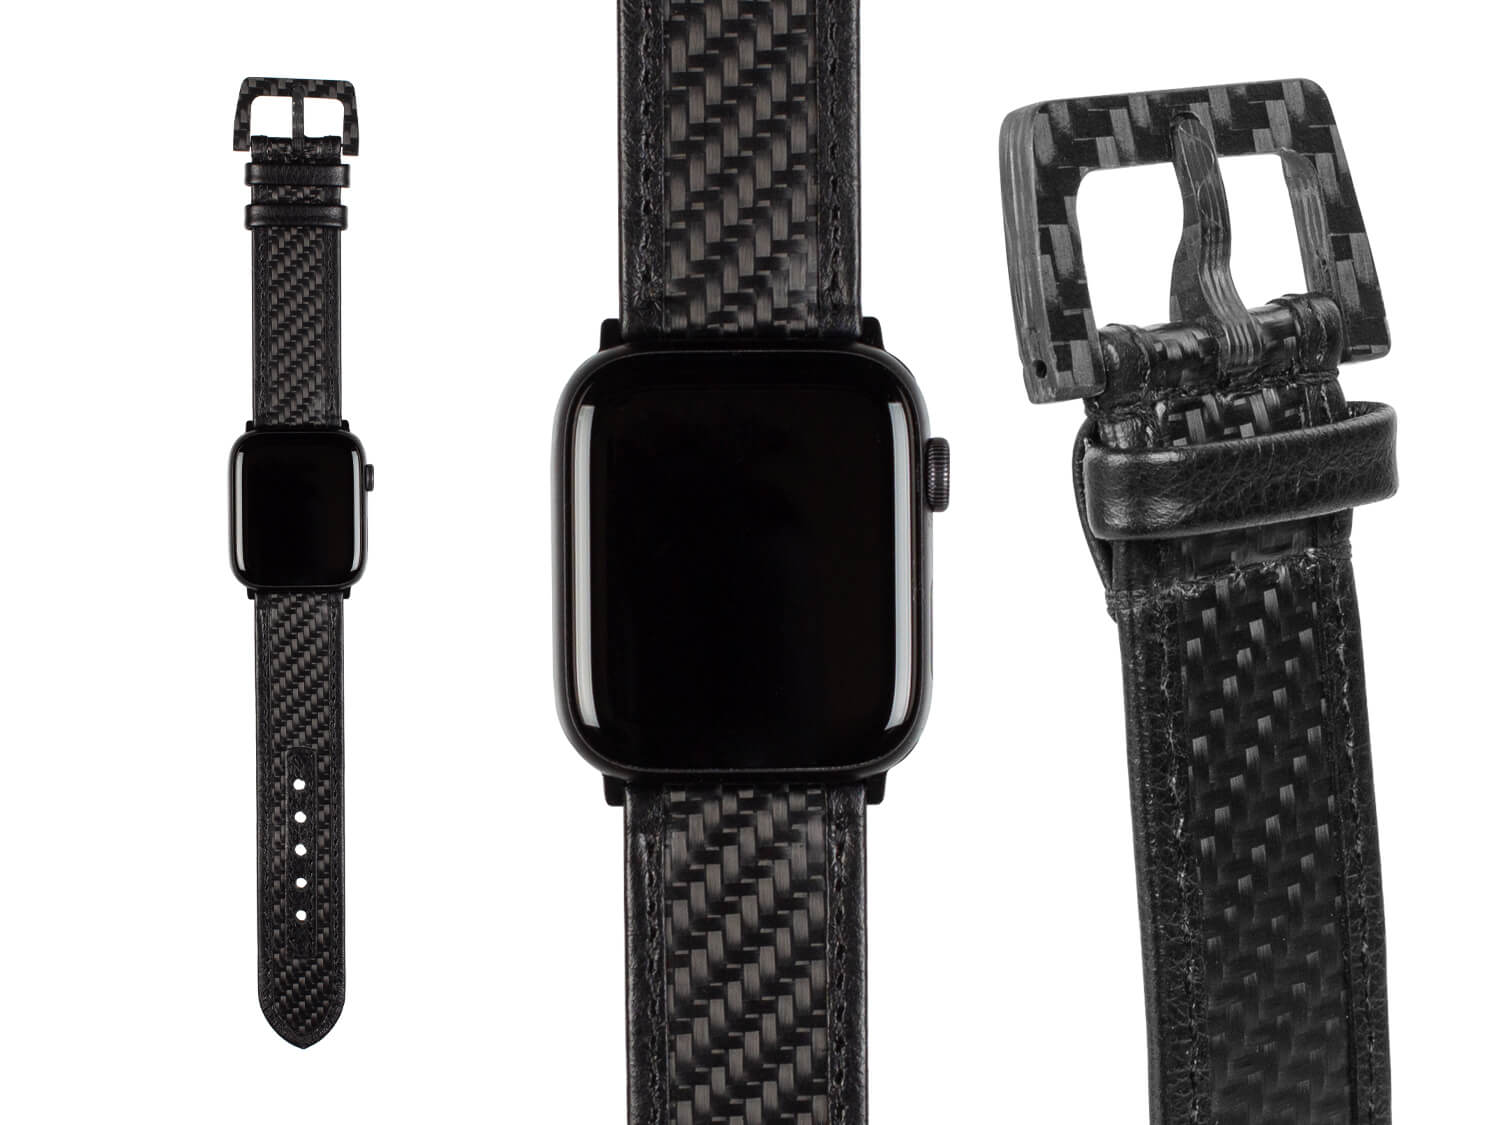 REAL Carbon Carbon (42mm/44mm) Leather – Fiber Fiber Gear & Band Watch Apple